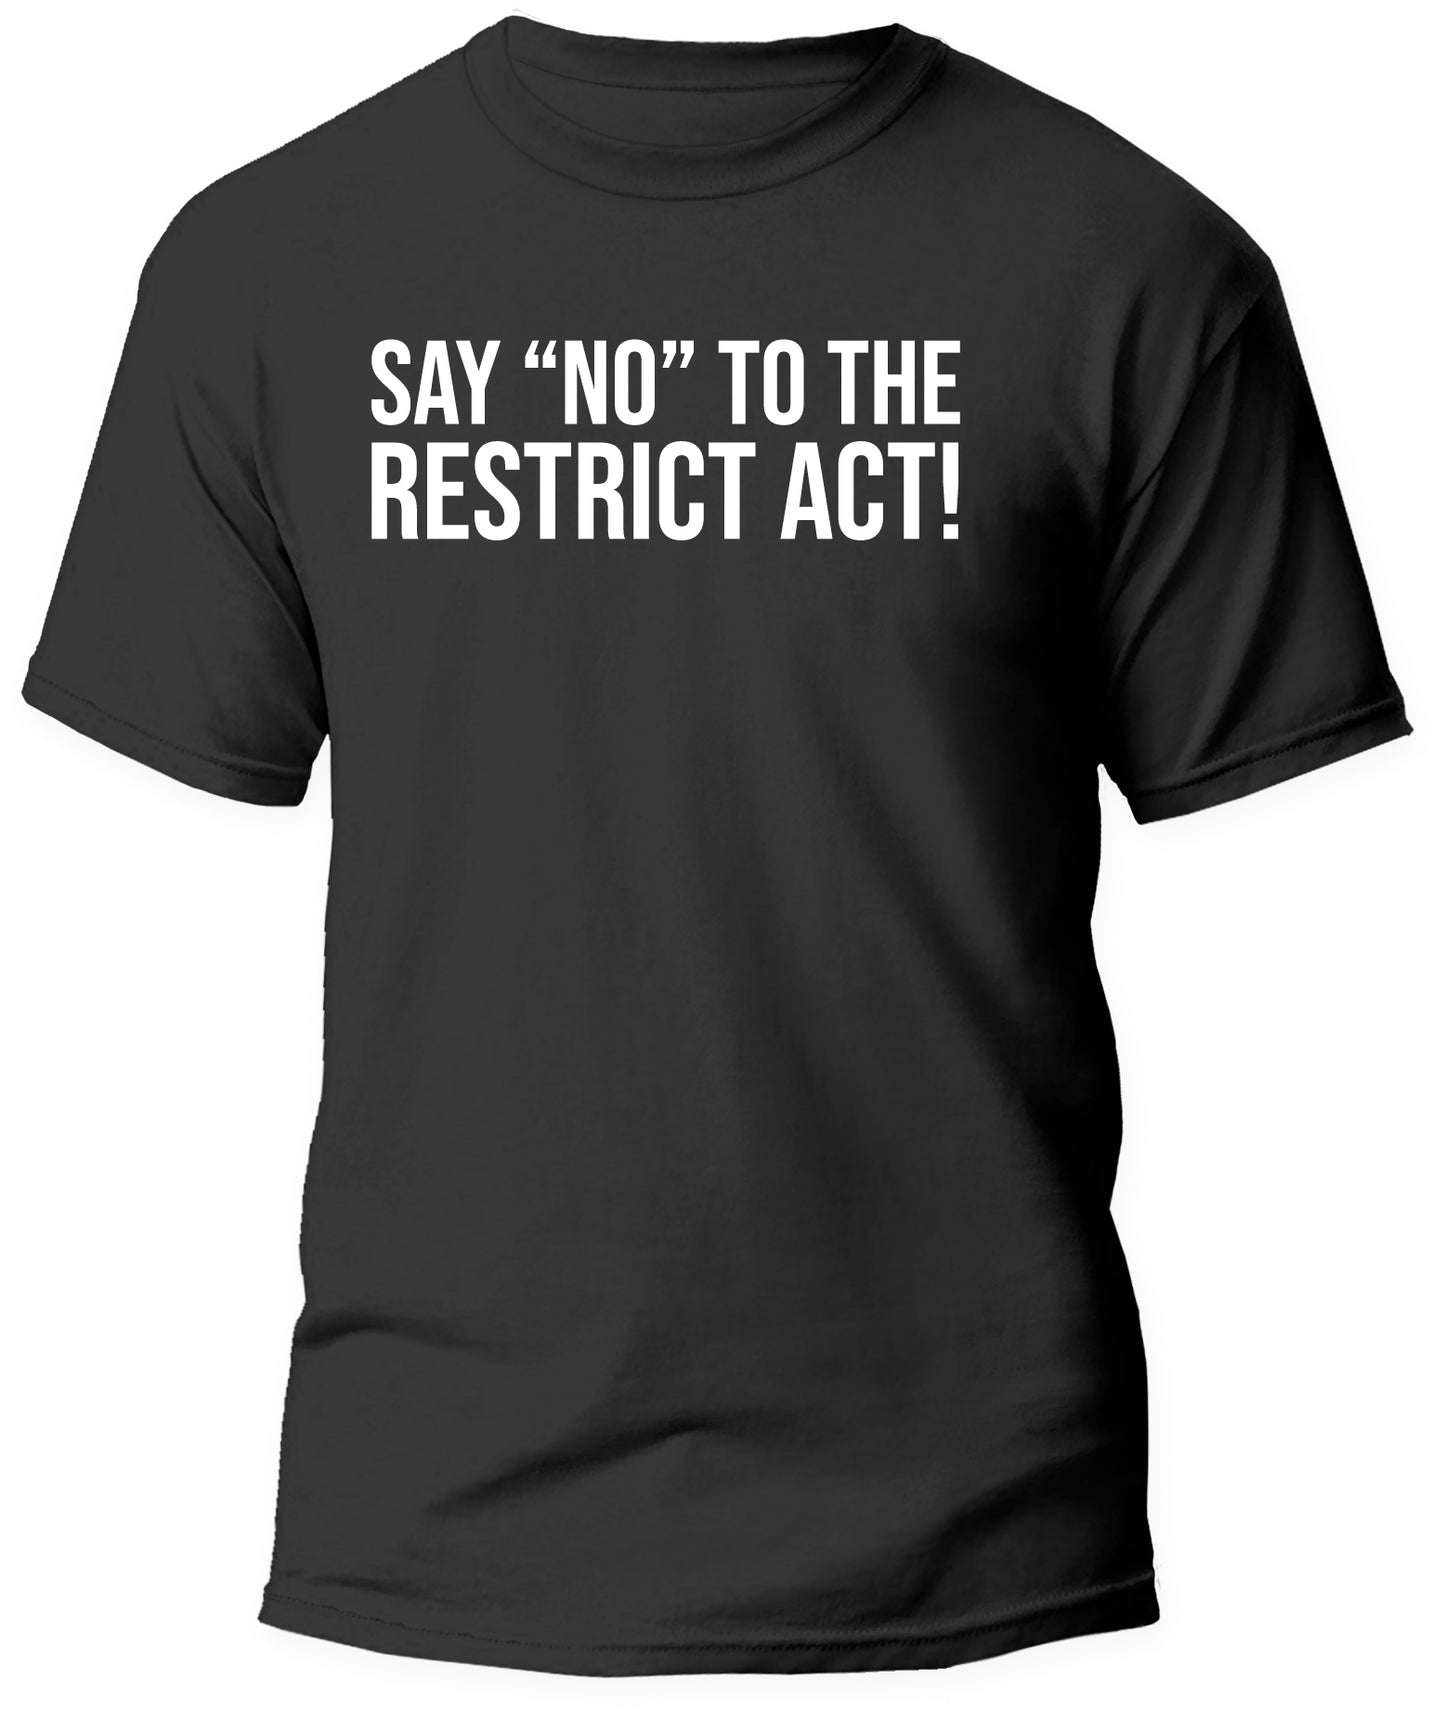 "No" Restrict Act!